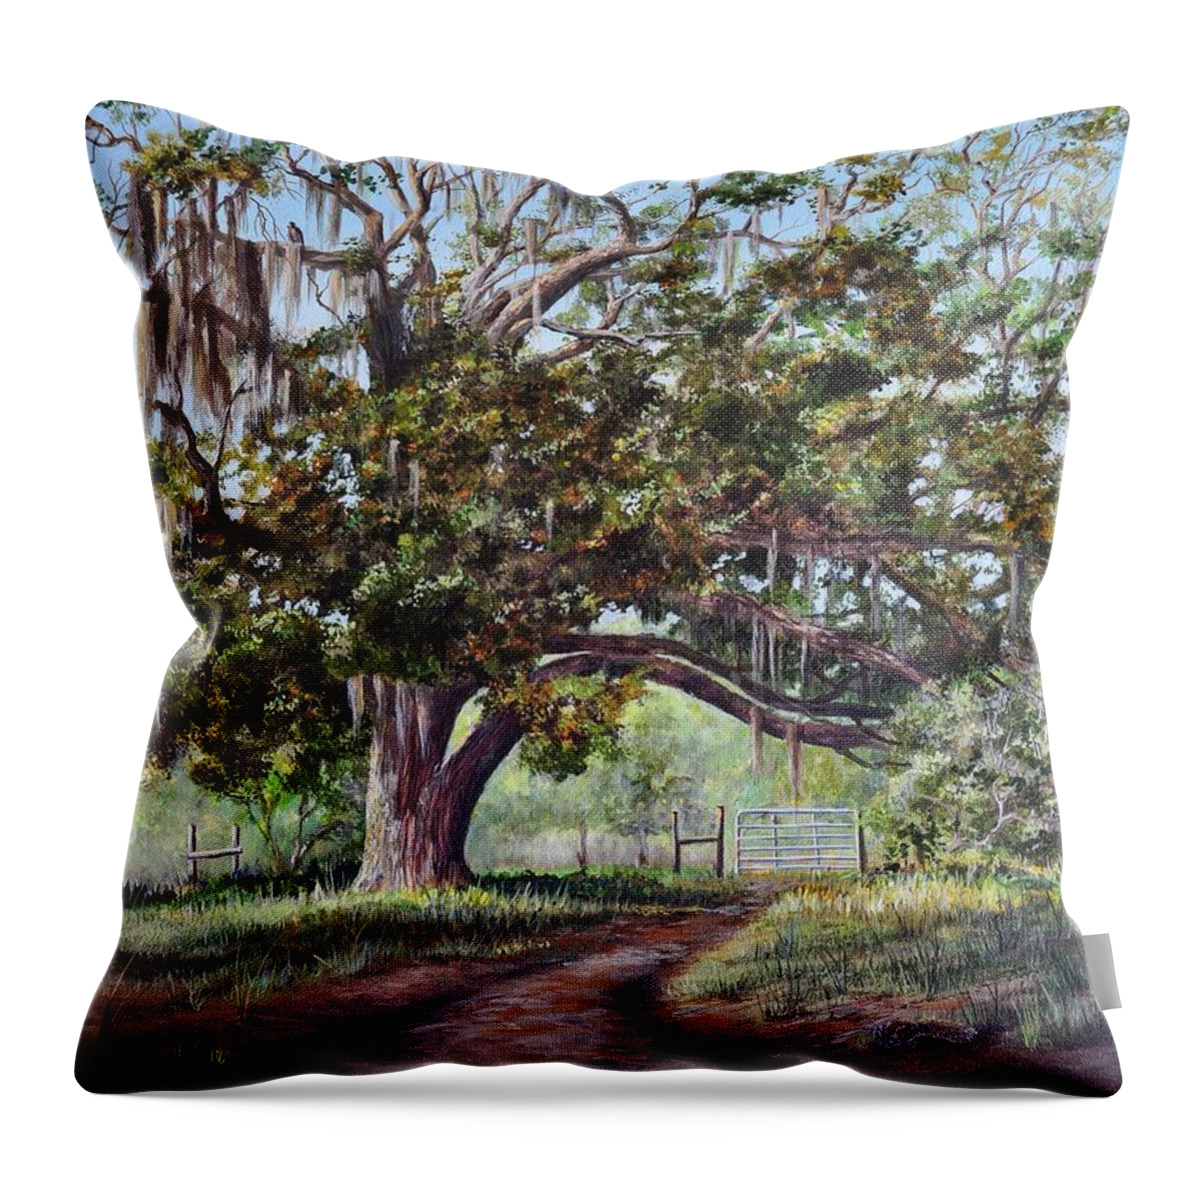 Live Oak Tree Throw Pillow featuring the painting Cop's Tree by AnnaJo Vahle